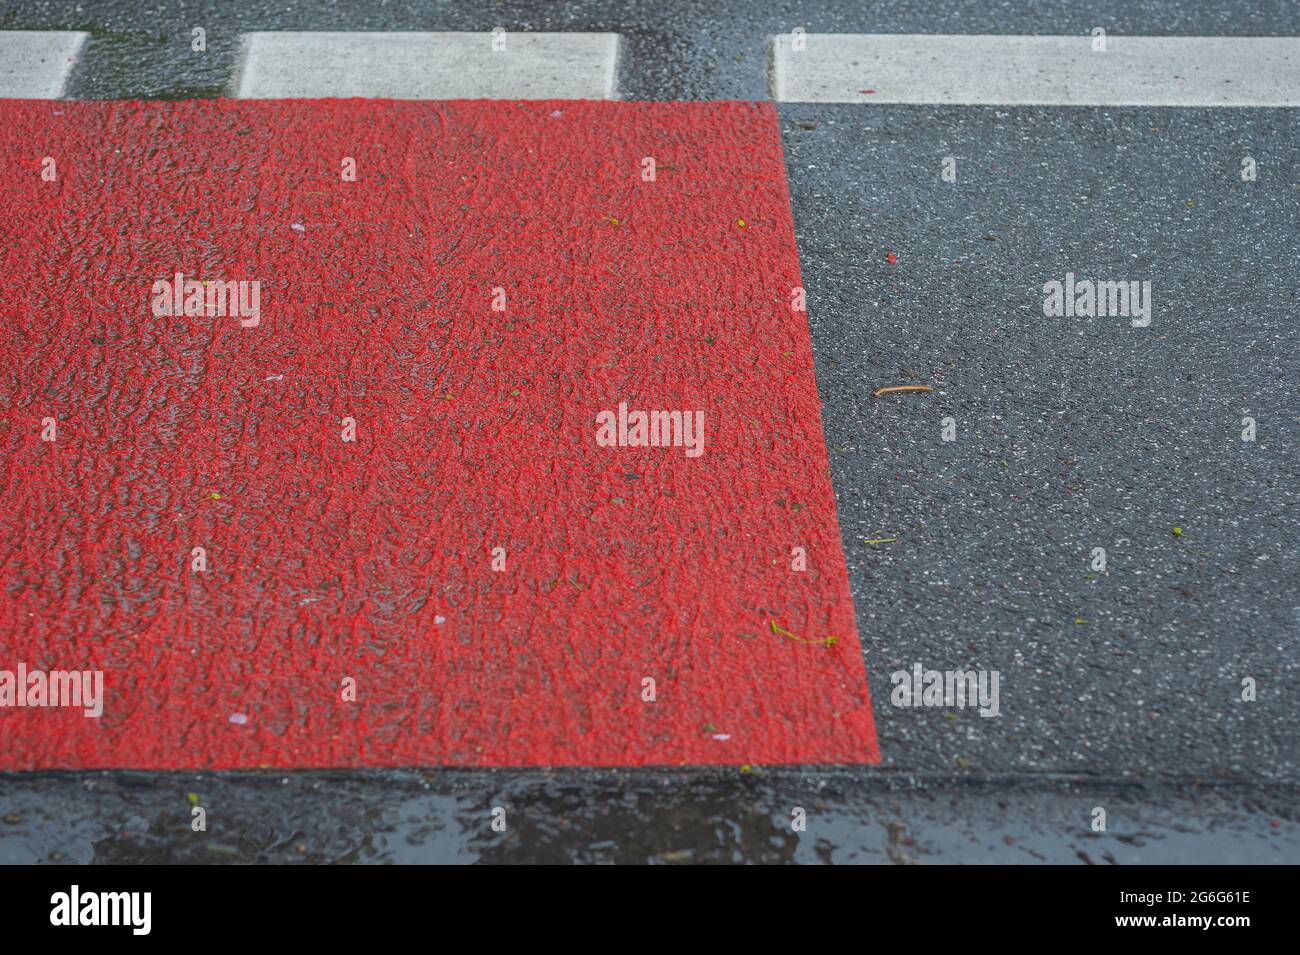 new bikeway with red and white markings at the junction Bleickenalle -Hohenzollernring, Germany, Hamburg Stock Photo